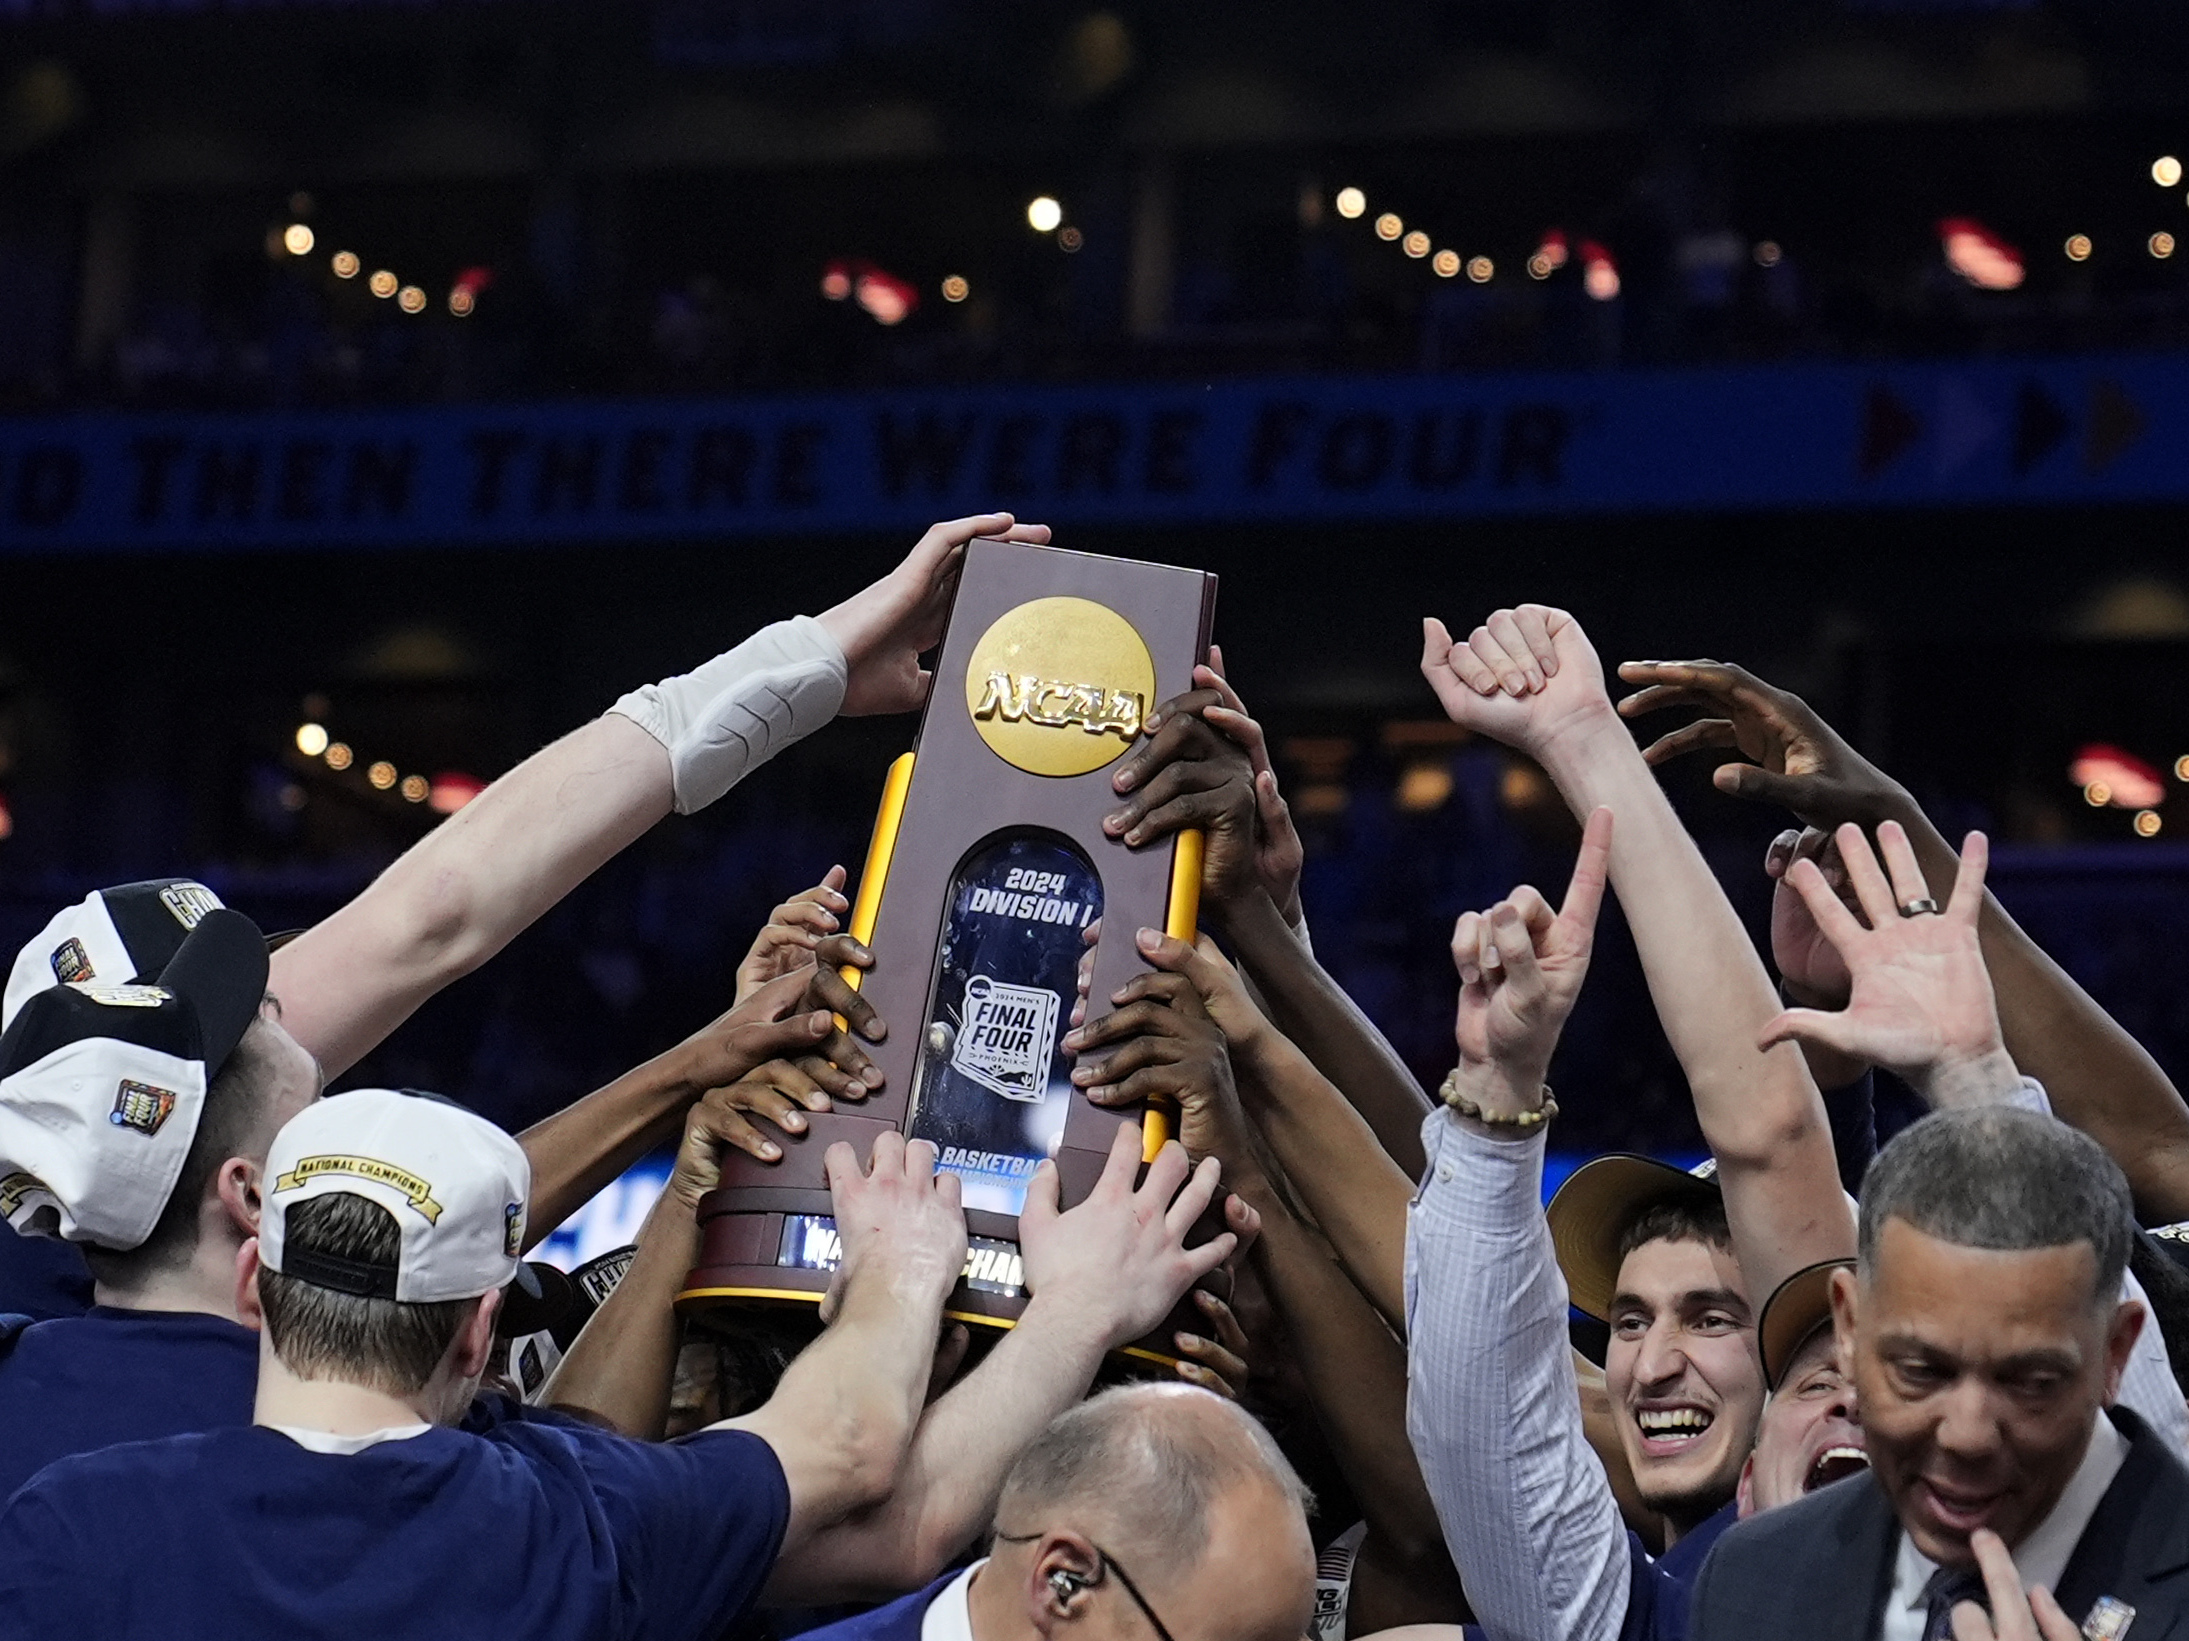 The UConn men’s basketball team has won back-to-back NCAA championships